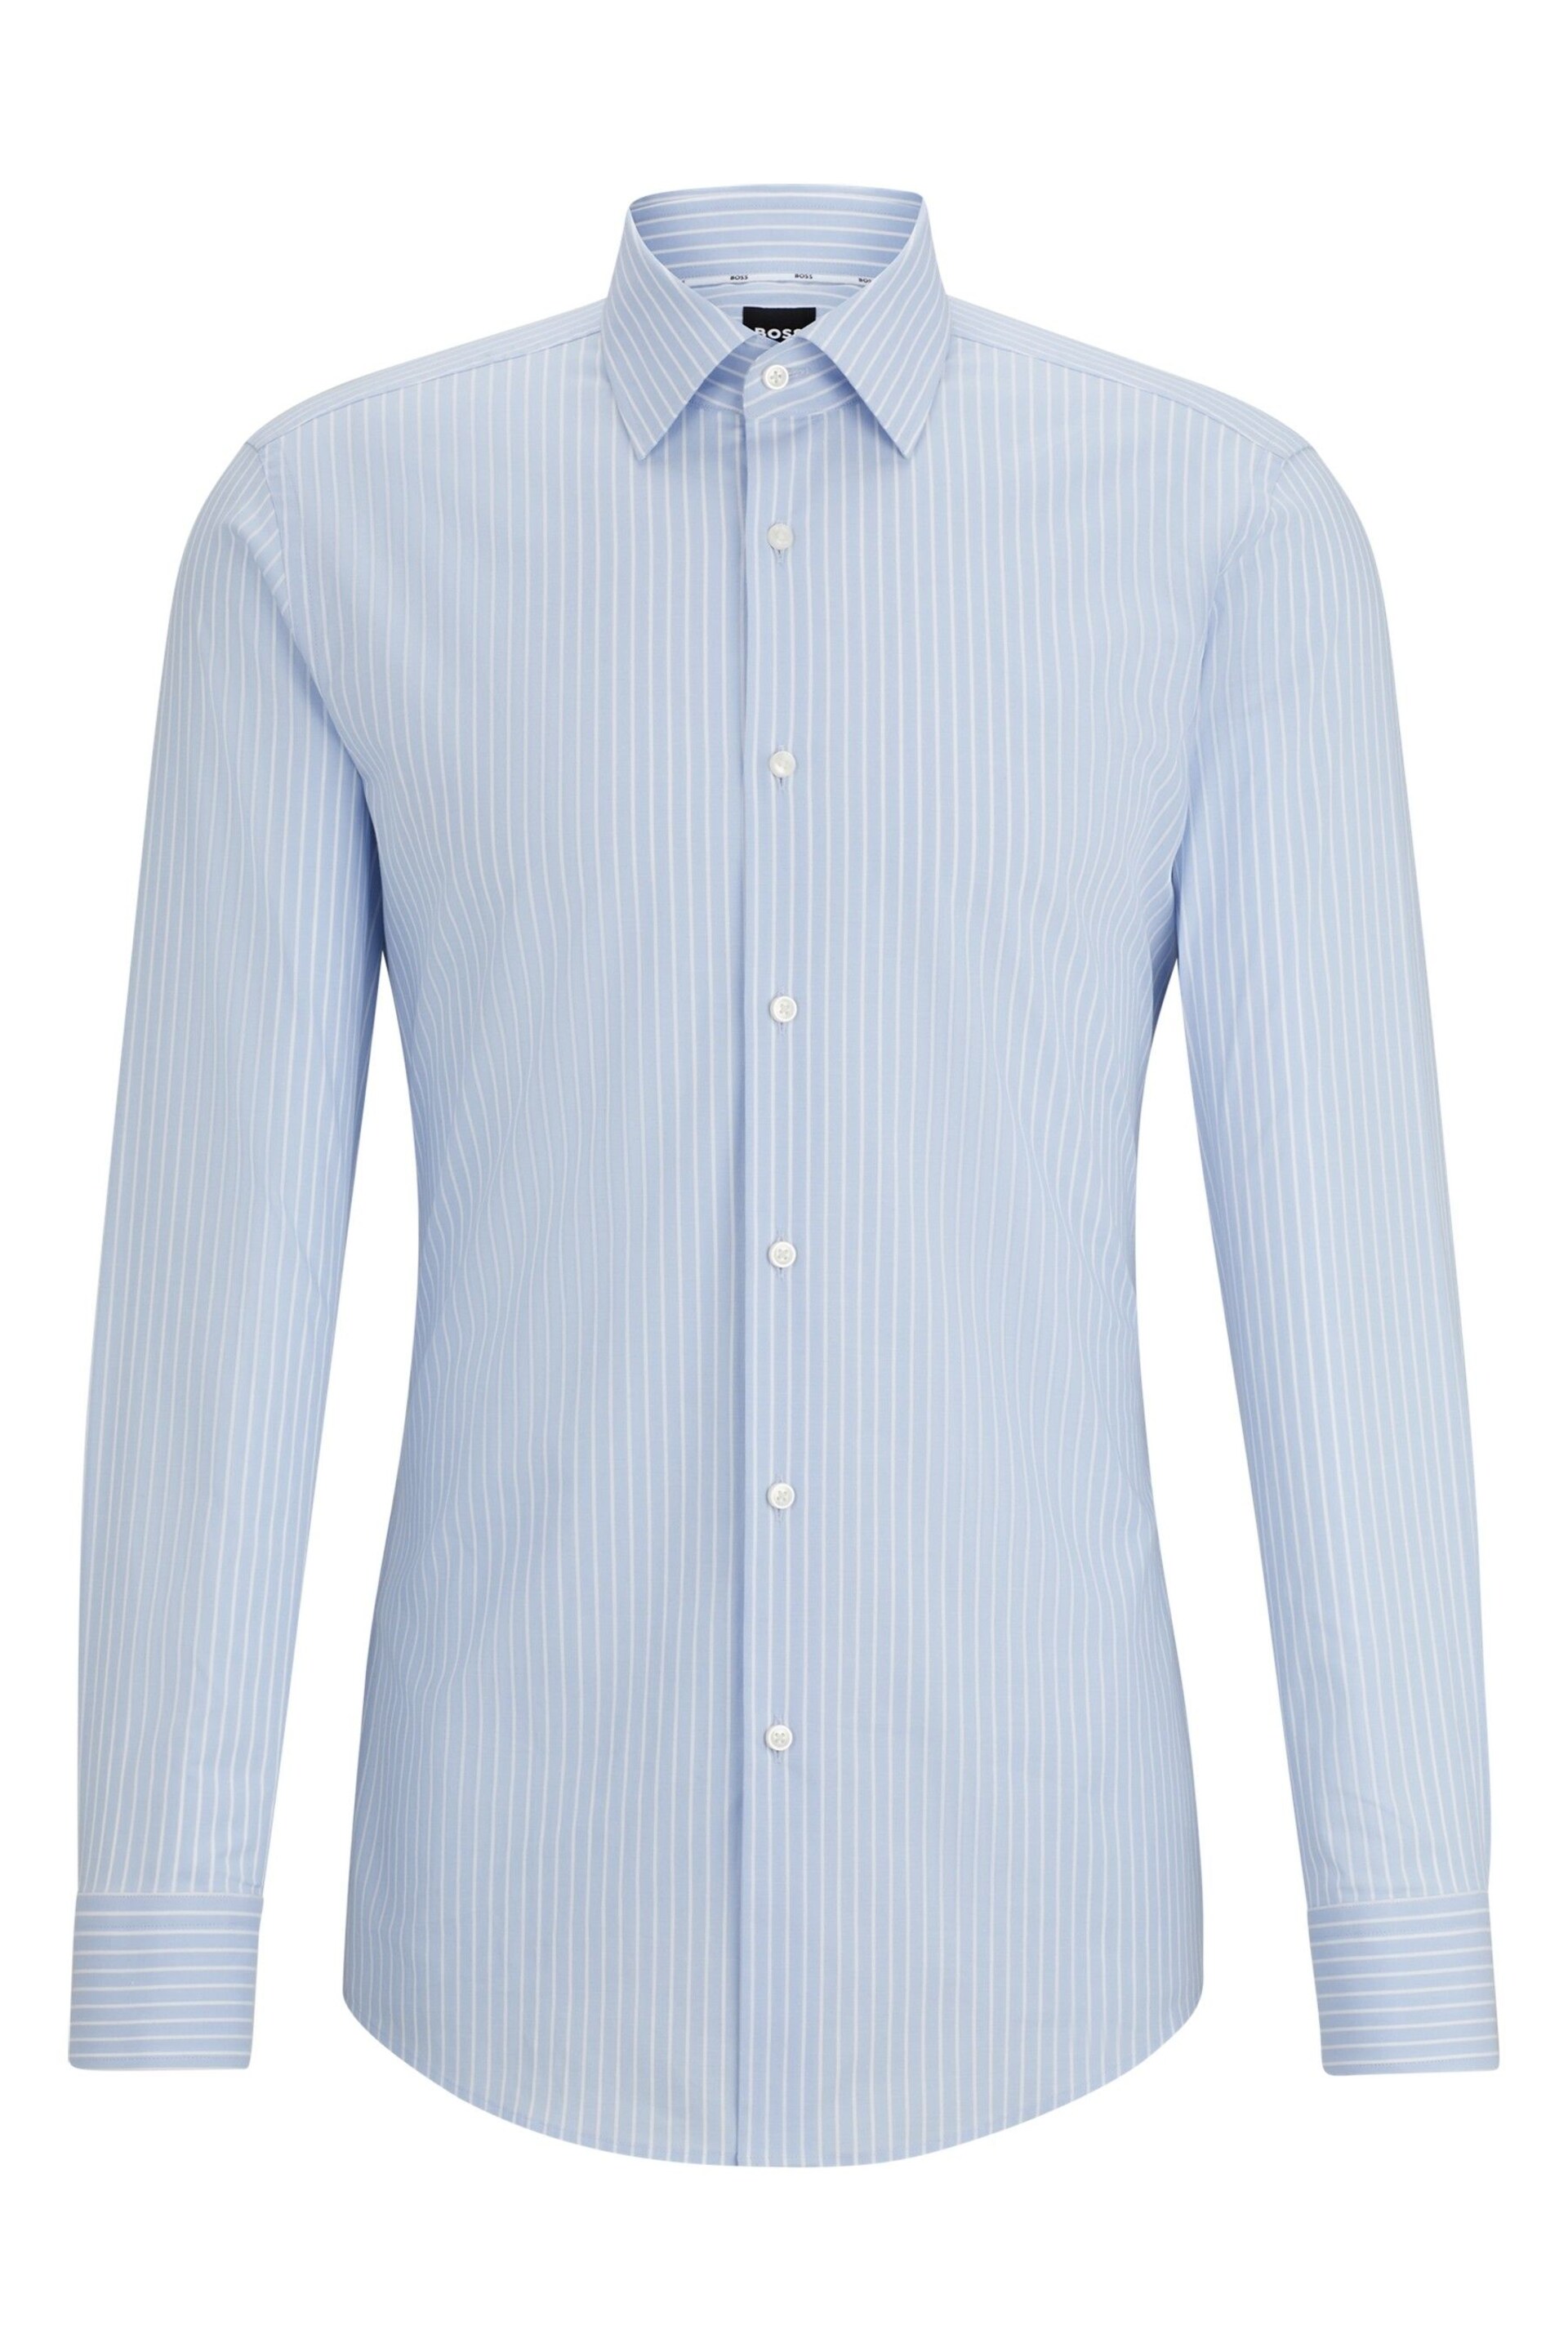 BOSS Blue Slim-Fit Shirt In Striped Easy-Iron Stretch Cotton - Image 6 of 6